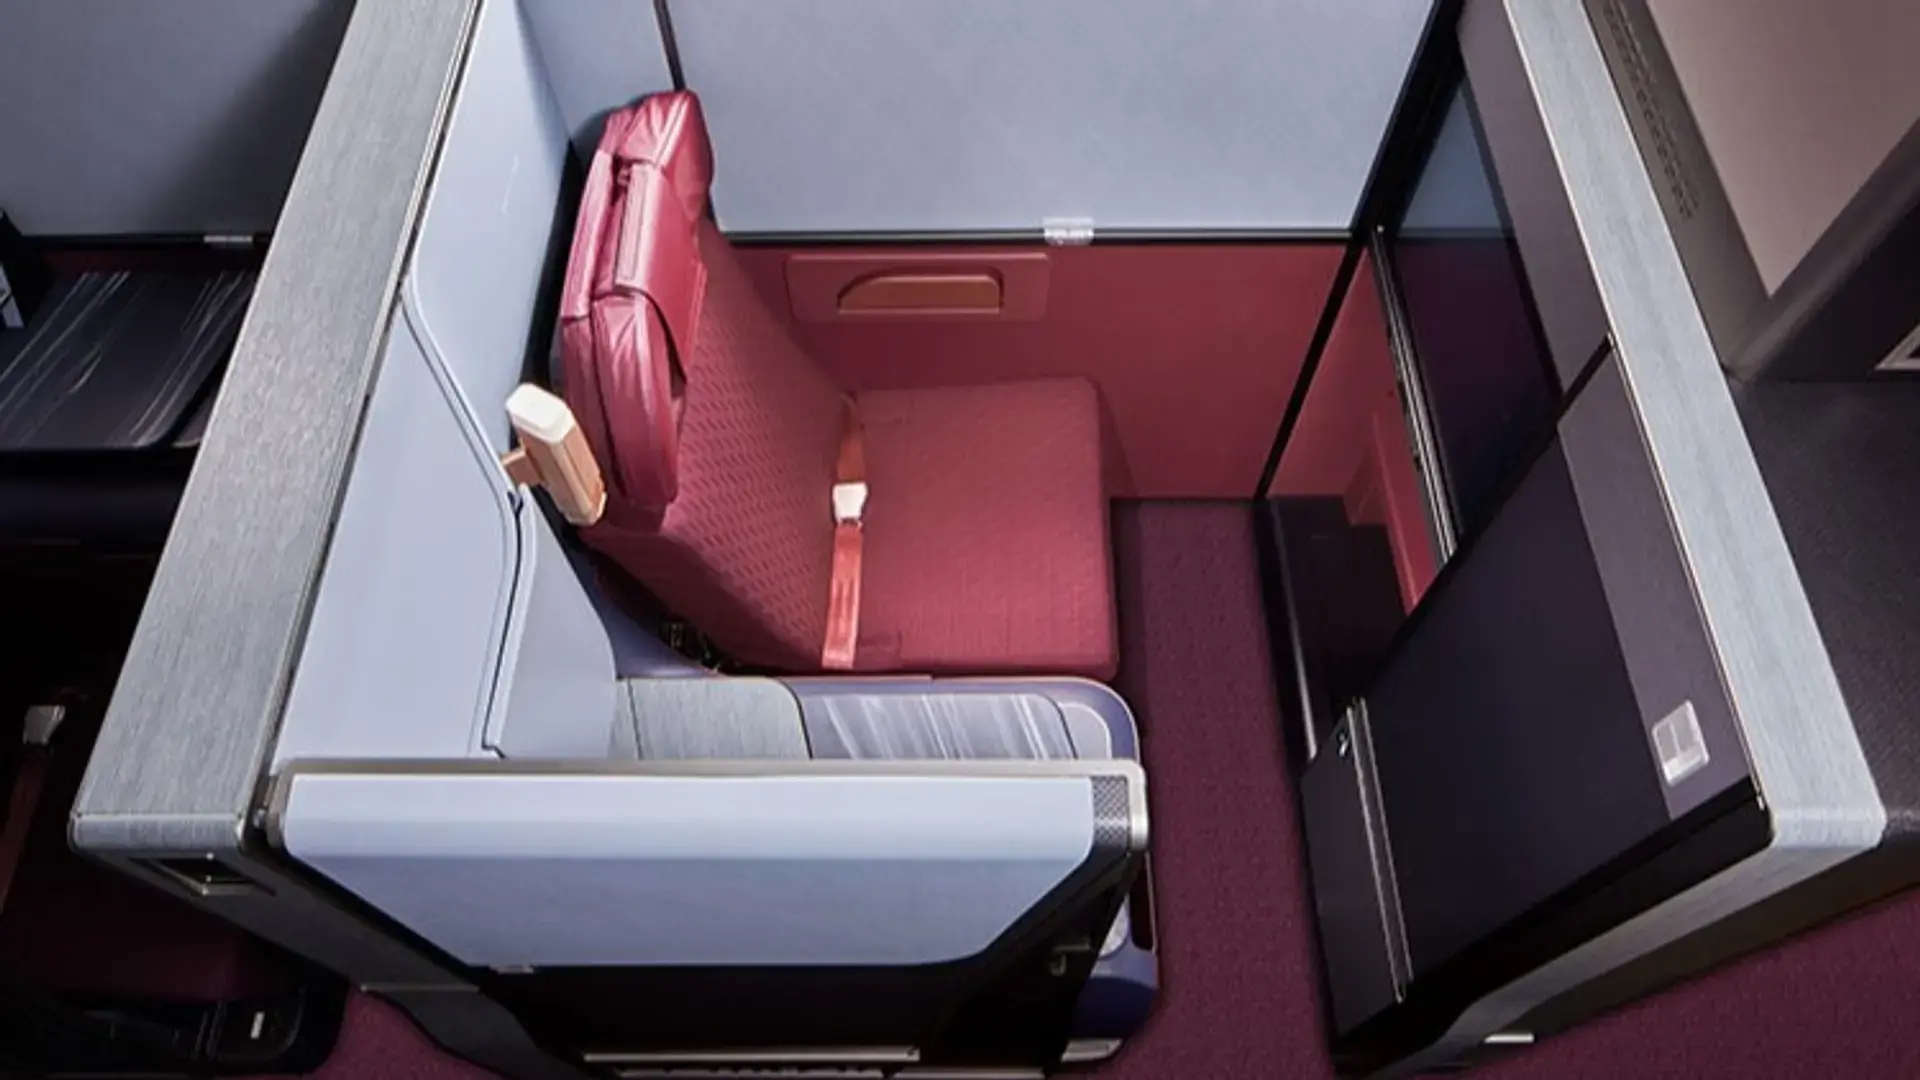 Airlines Articles - 10 Business Class Seats new for 2024 & Coming Soon! 